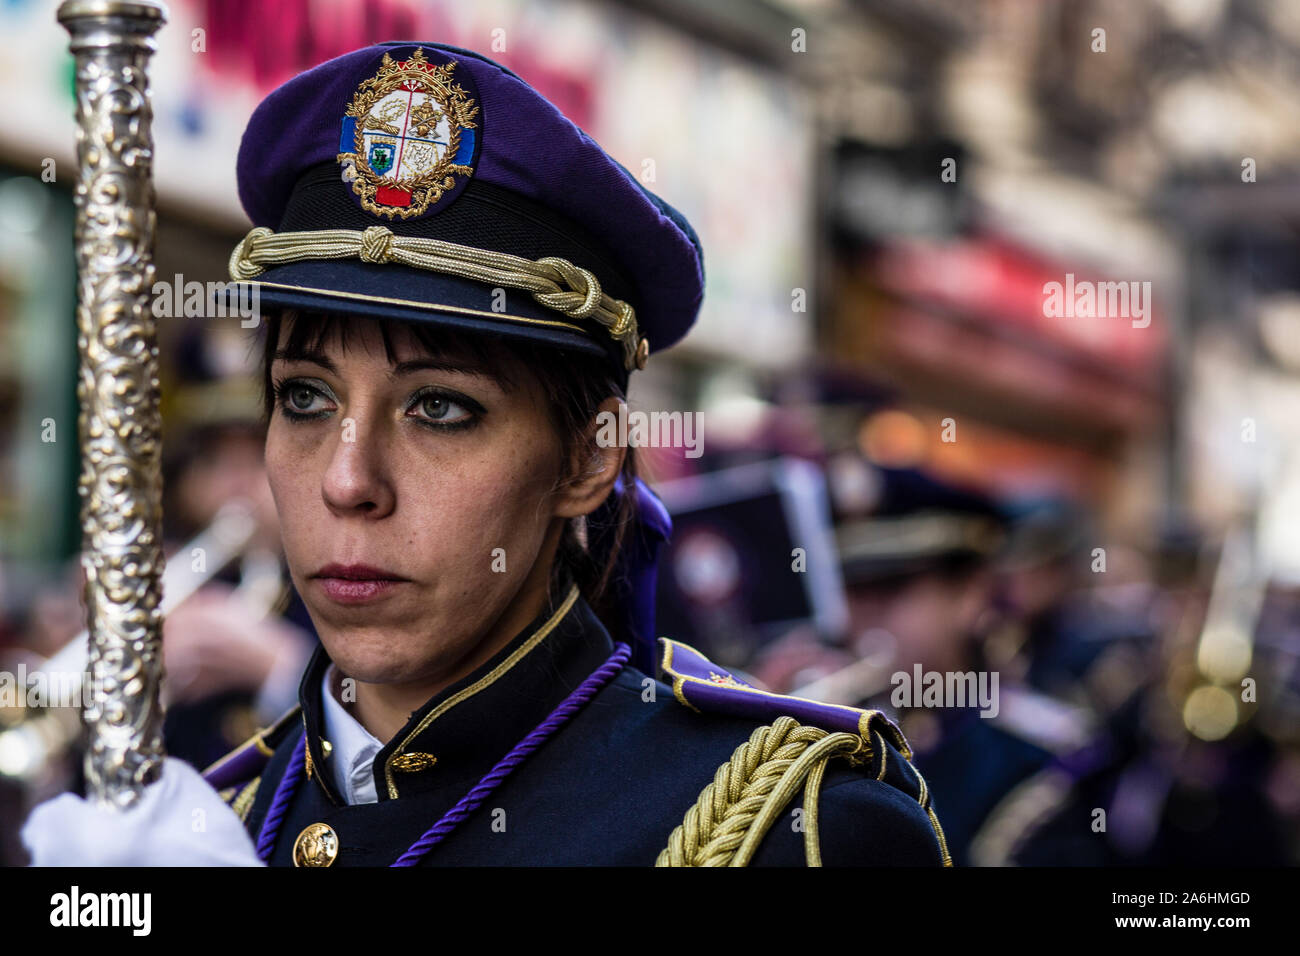 A Catholic parishioner during the procession. Virgin Almudena procession happens through the streets of Madrid where the saint patron of the capital of Spain is carried from Plaza Mayor to Almudena's Cathedral. Hundreds of catholic congregations join the procession to honour the virgin. Stock Photo